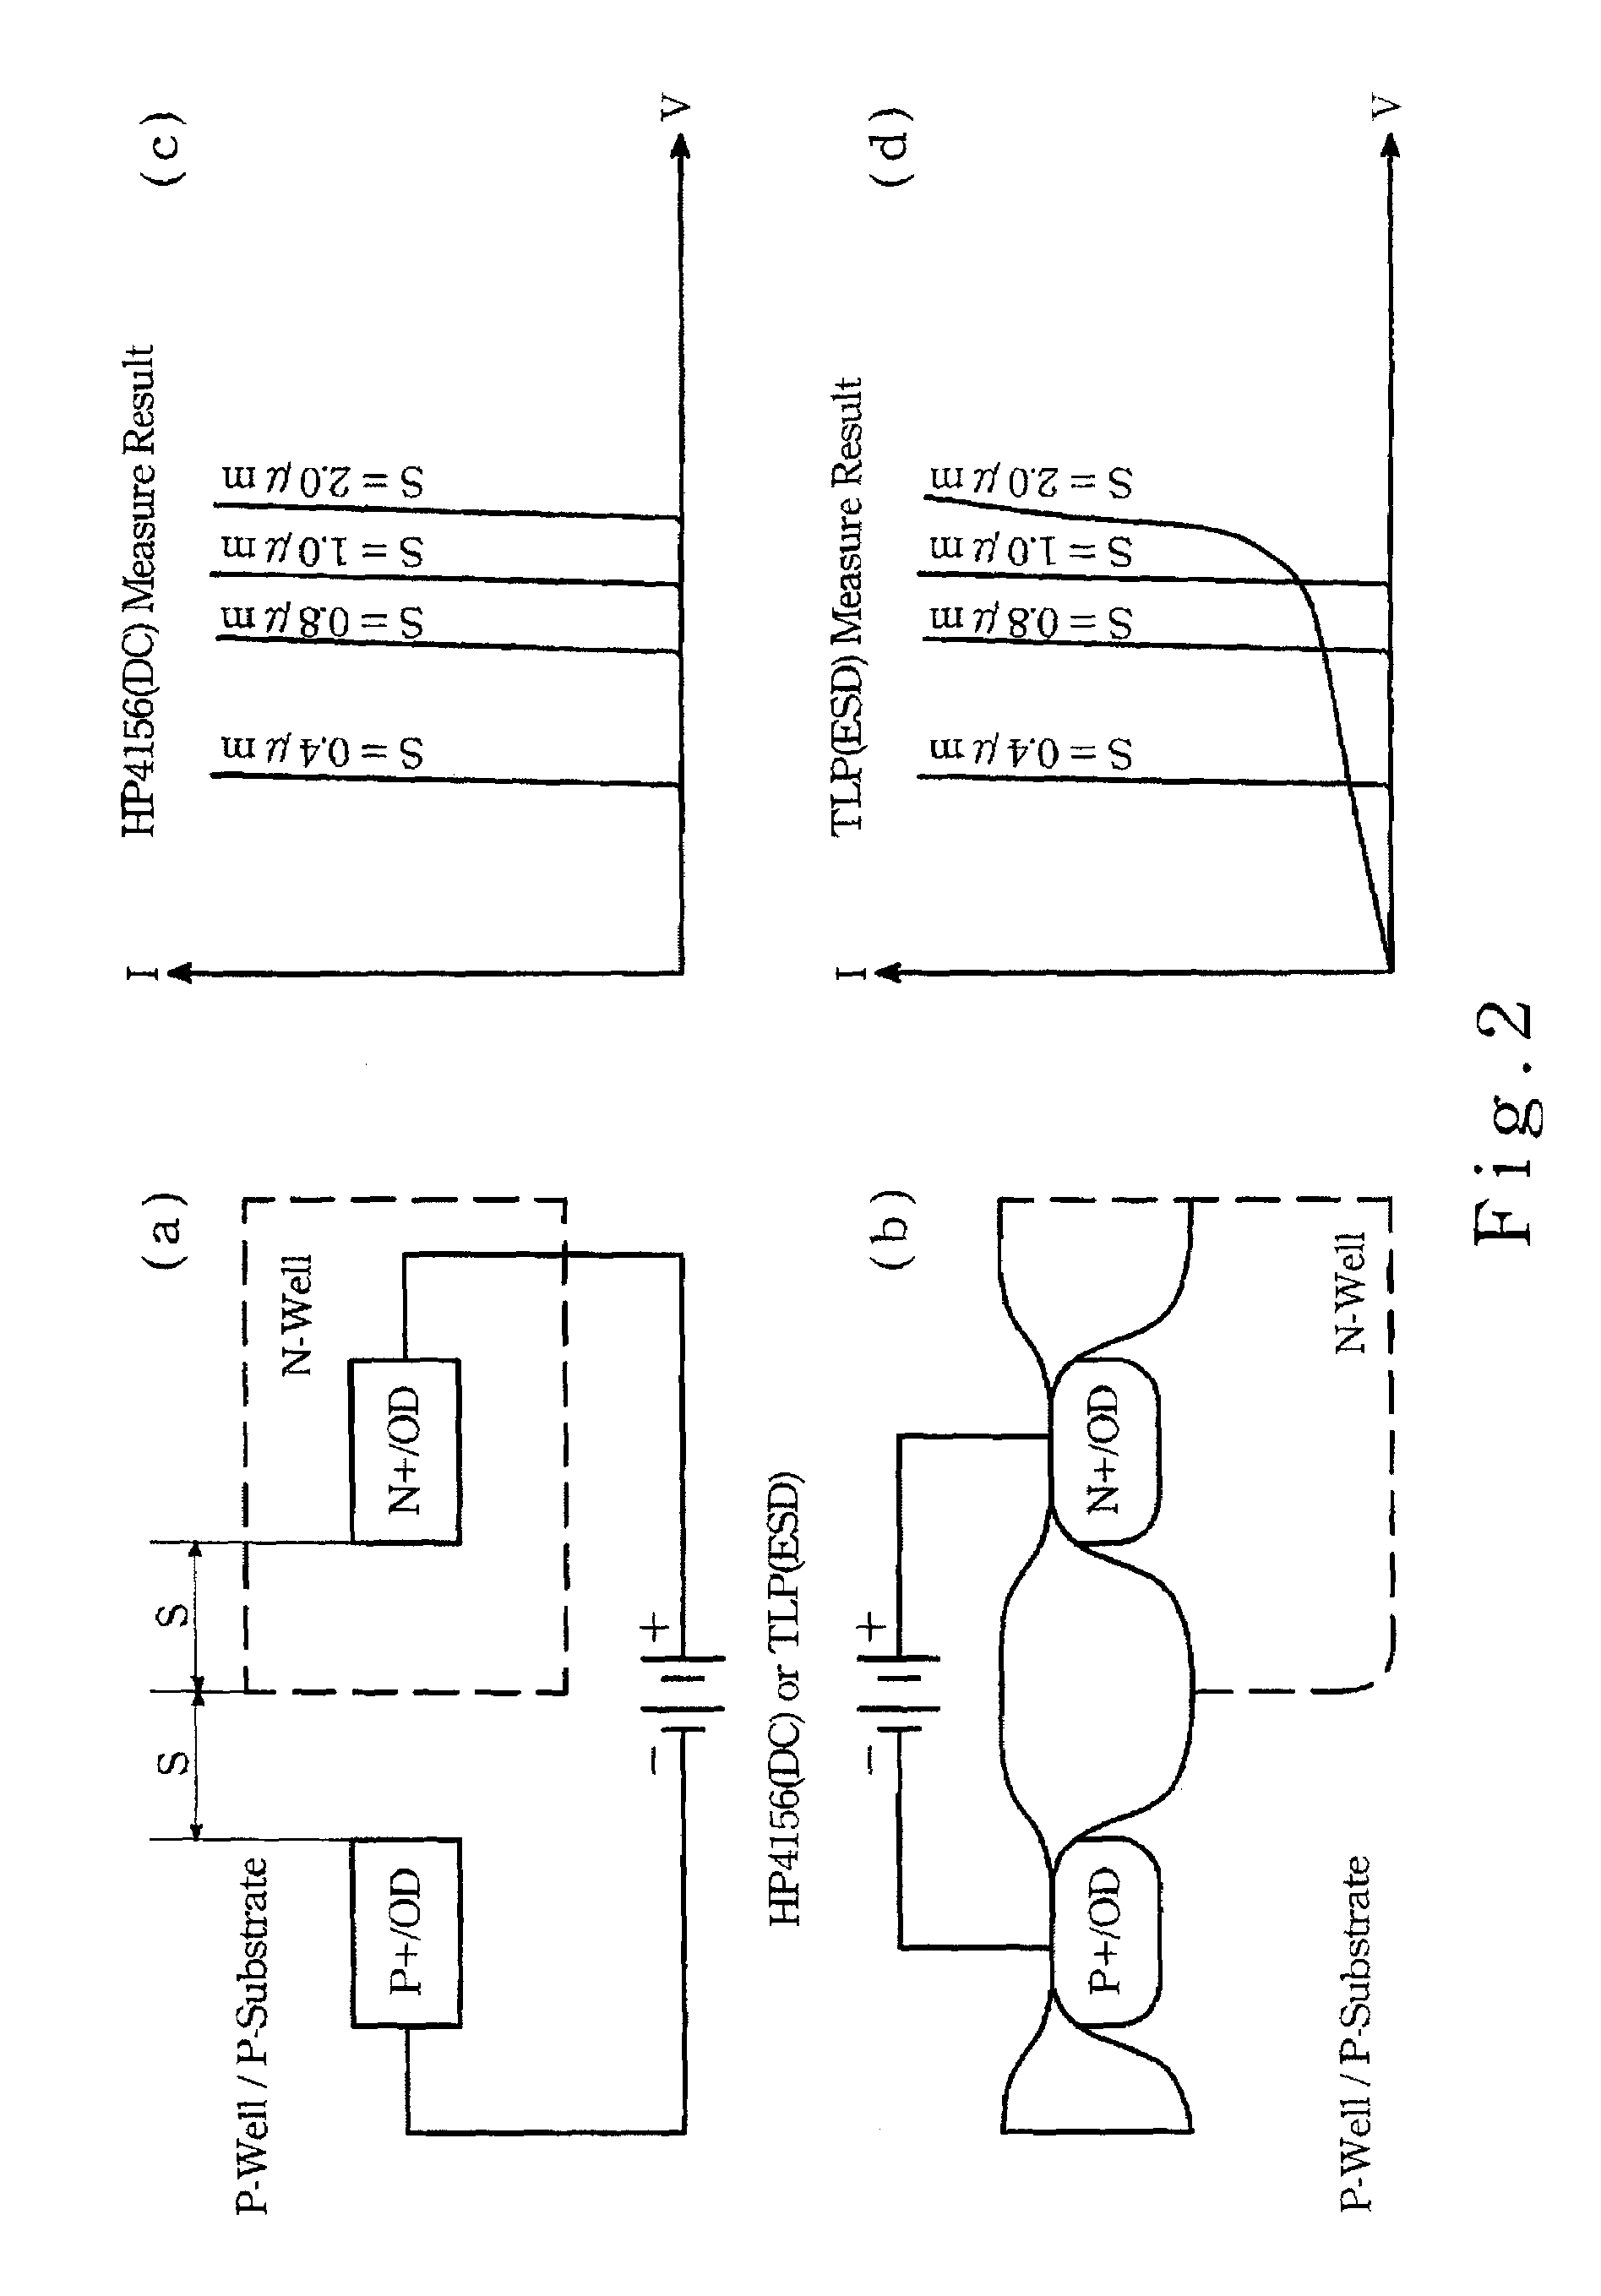 ESD device layout for effectively reducing internal circuit area and avoiding ESD and breakdown damage and effectively protecting high voltage IC